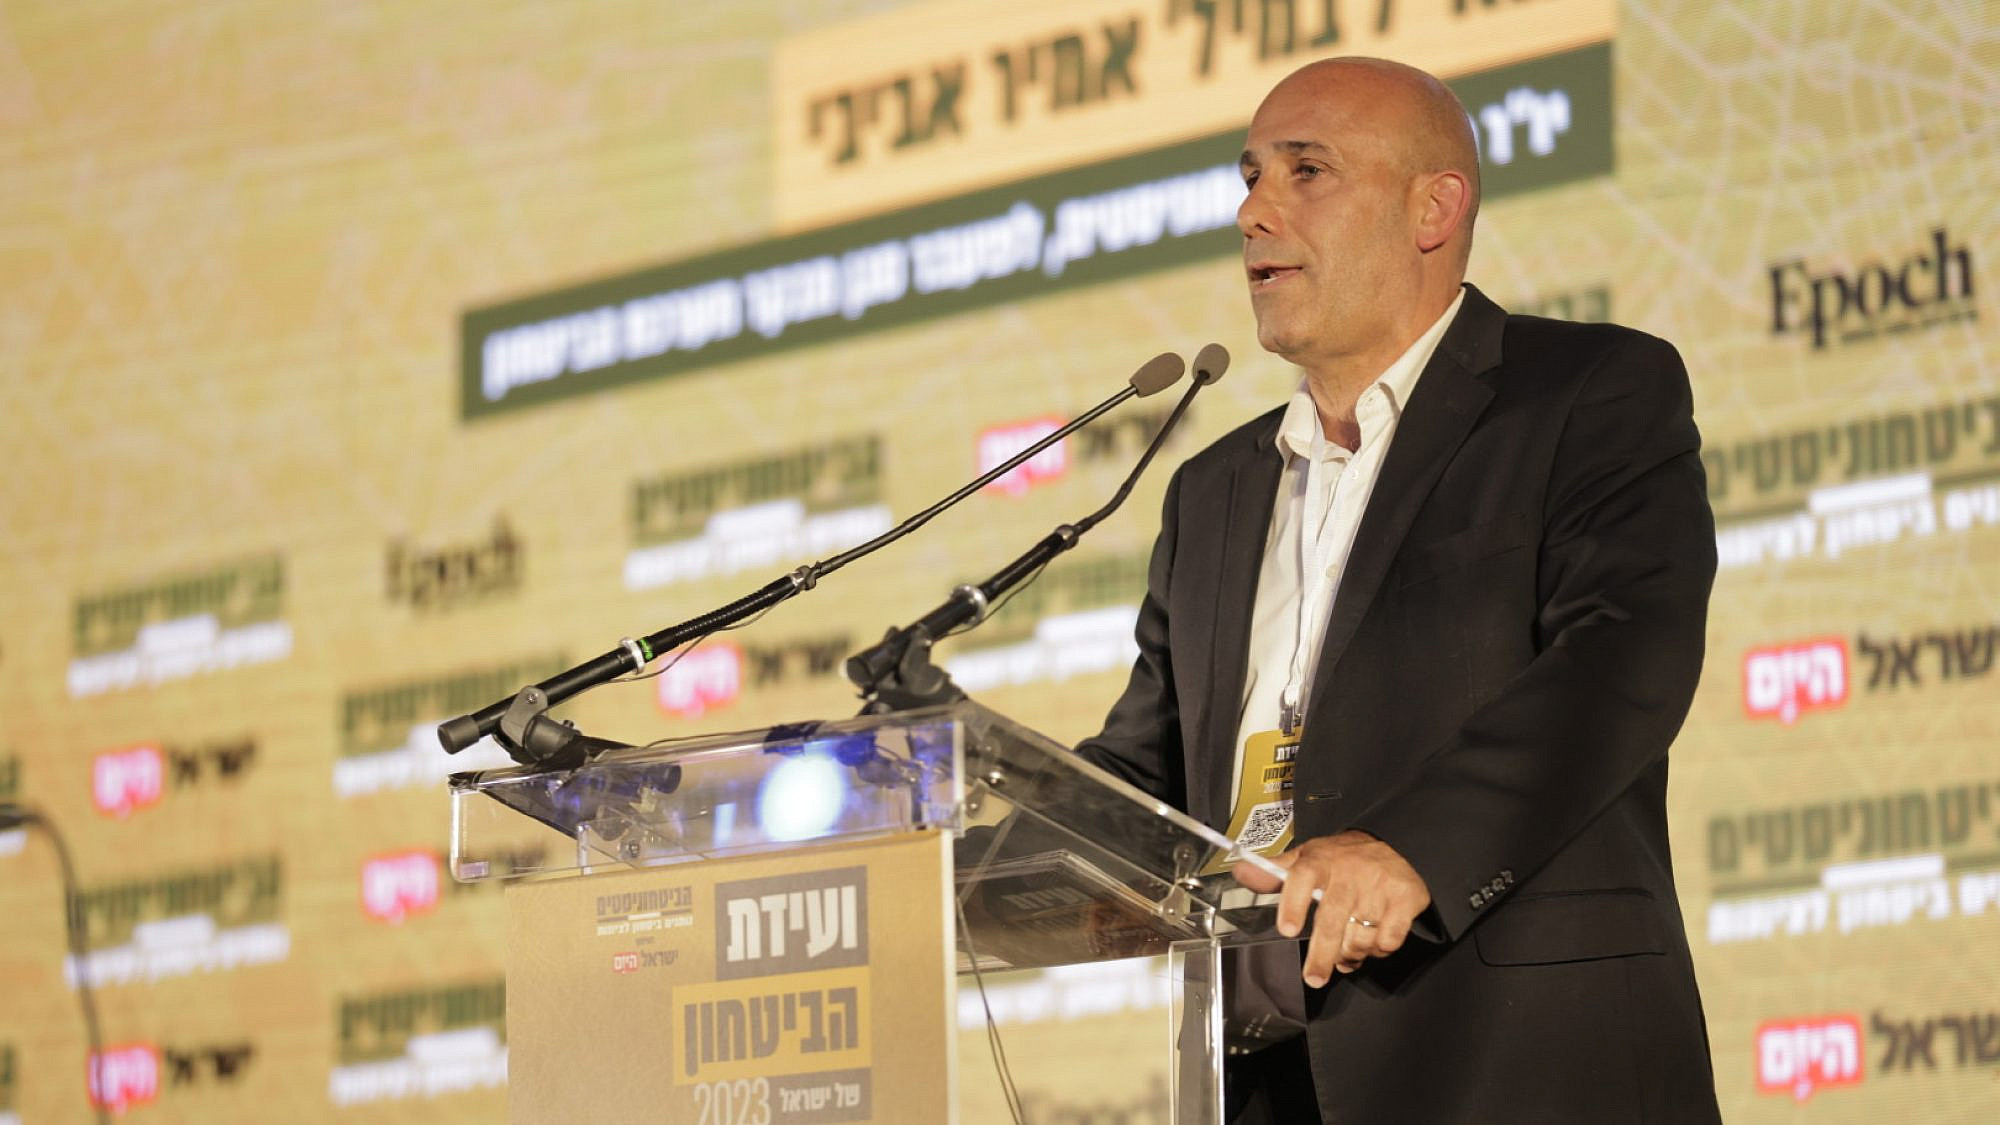 IDSF head Brig. Gen. (res.) Amir Aviv at the Israel Defense Conference in Jerusalem, May 9, 2023. Photo by Daniel Stravo/Israel Defense Conference/IDSF.